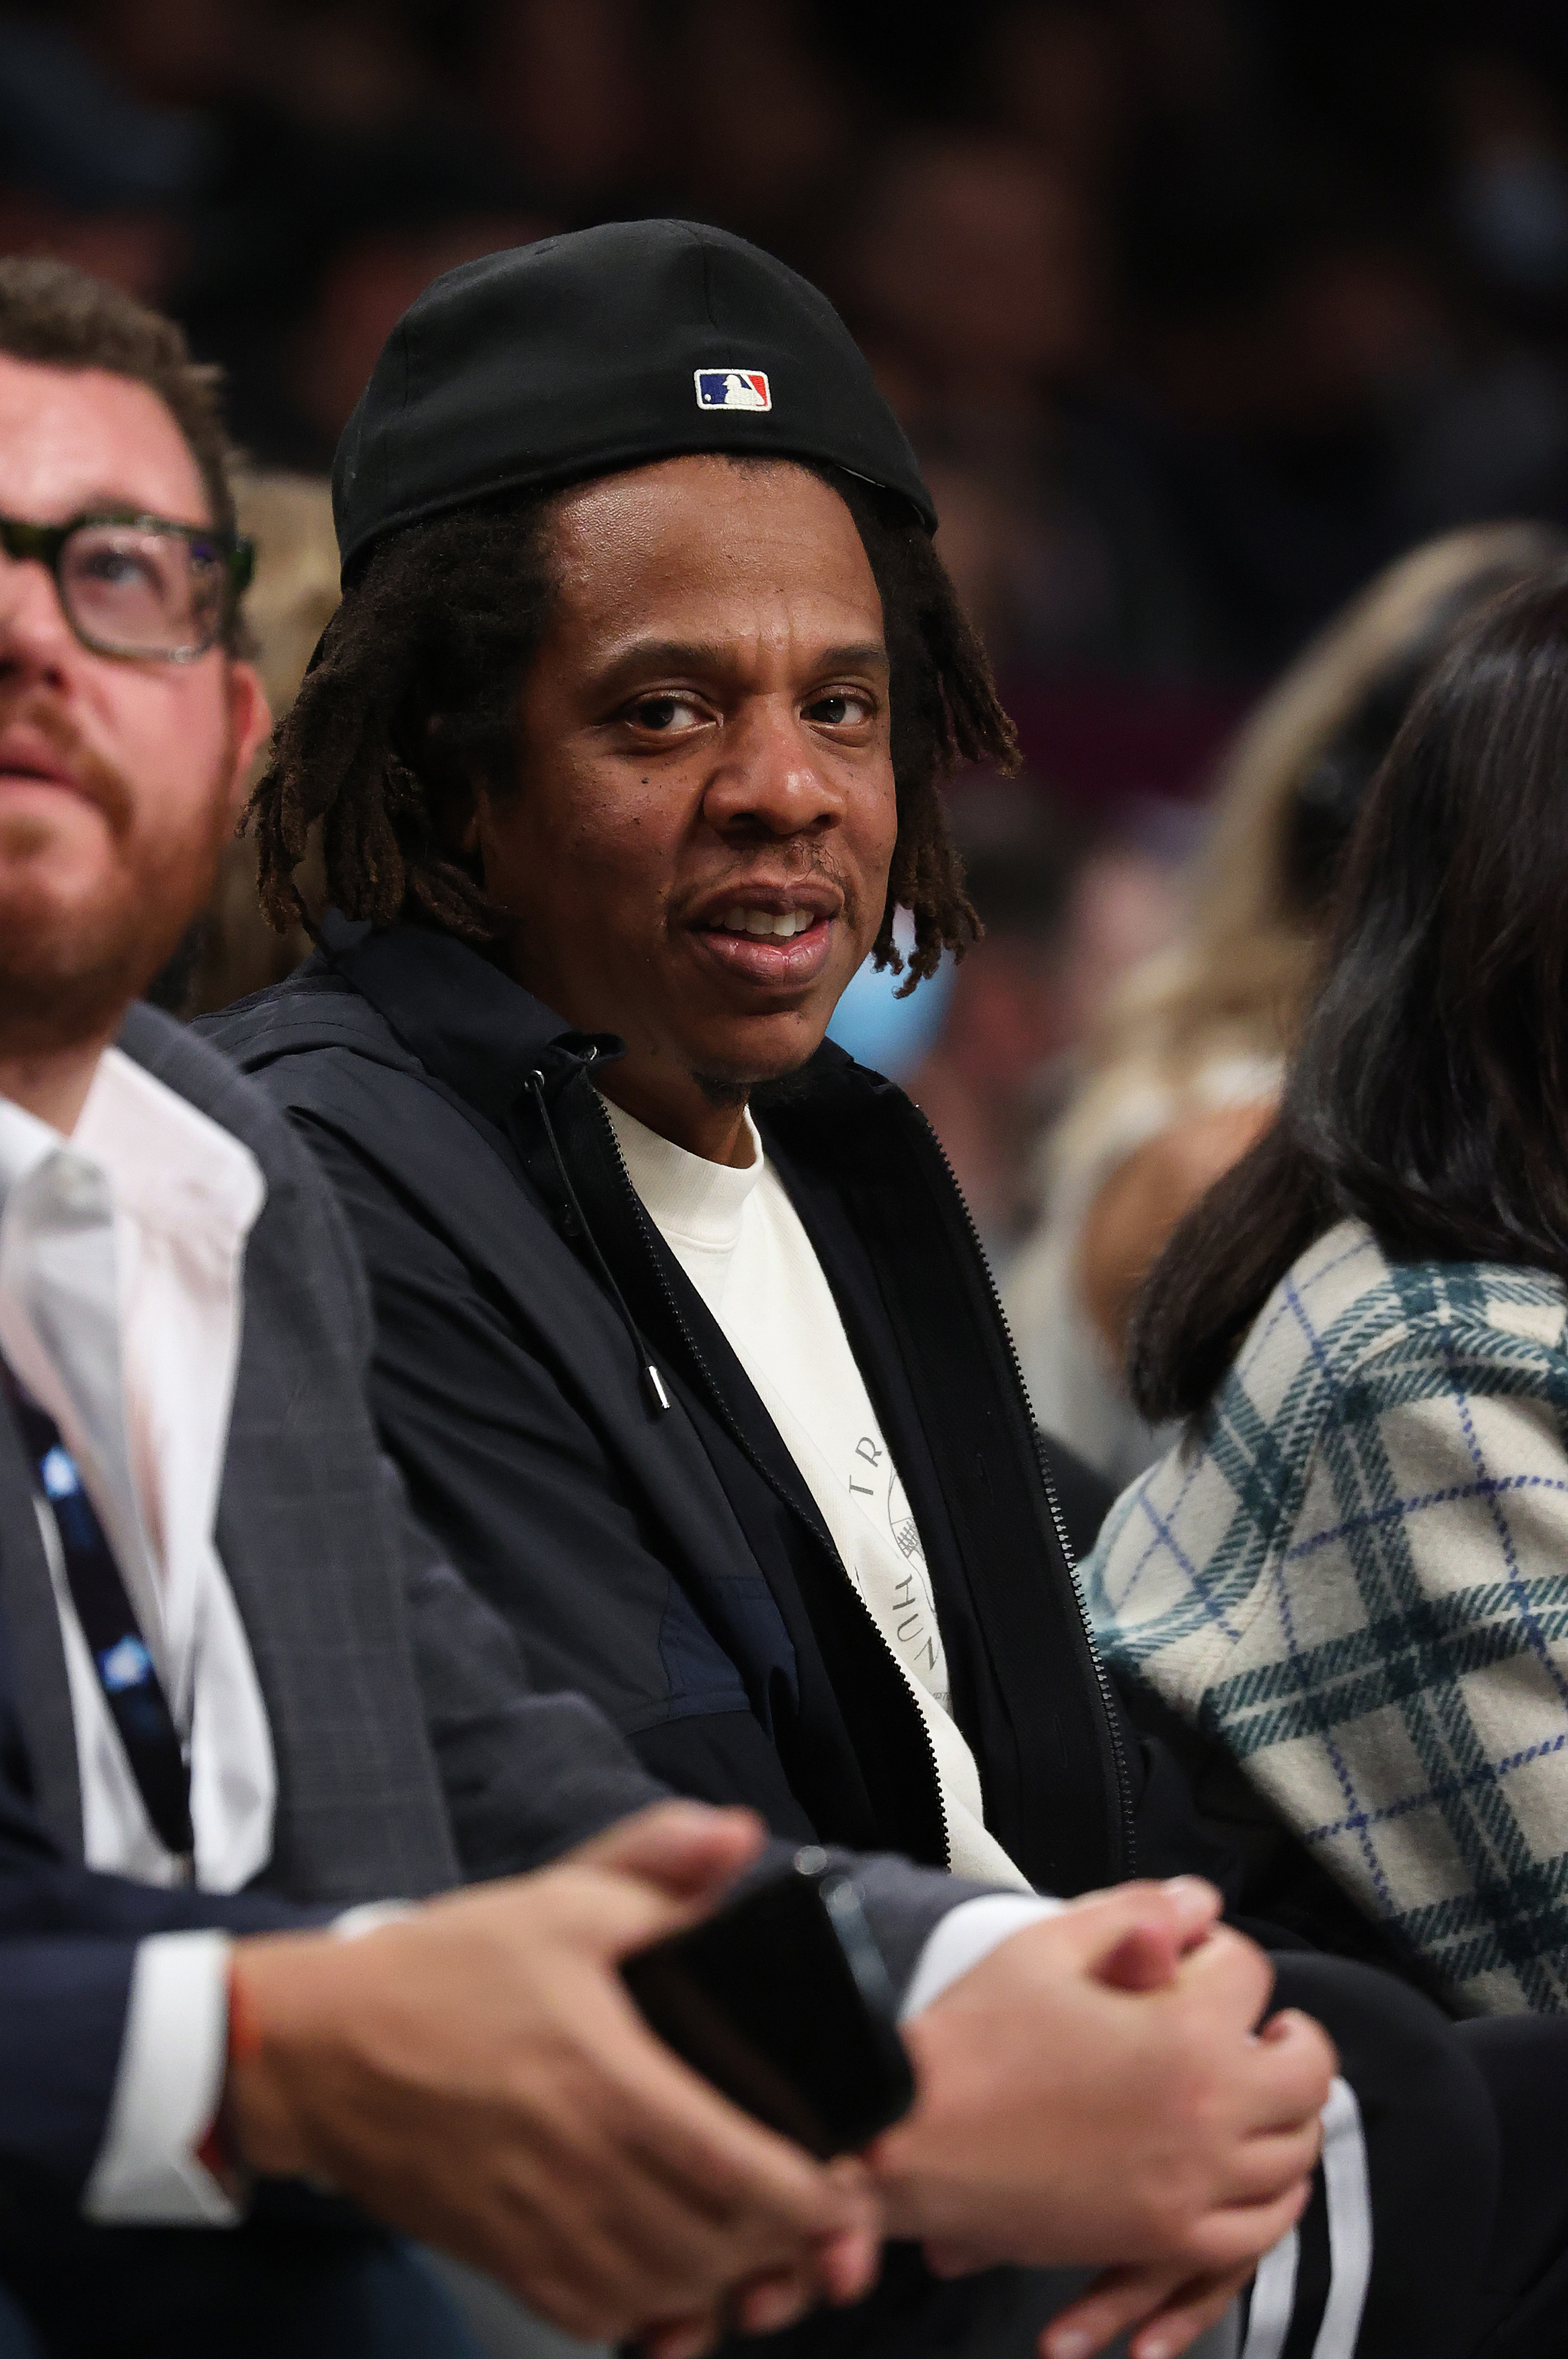 Jay-Z looks in the camera&#x27;s direction while sitting courtside at a basketball game